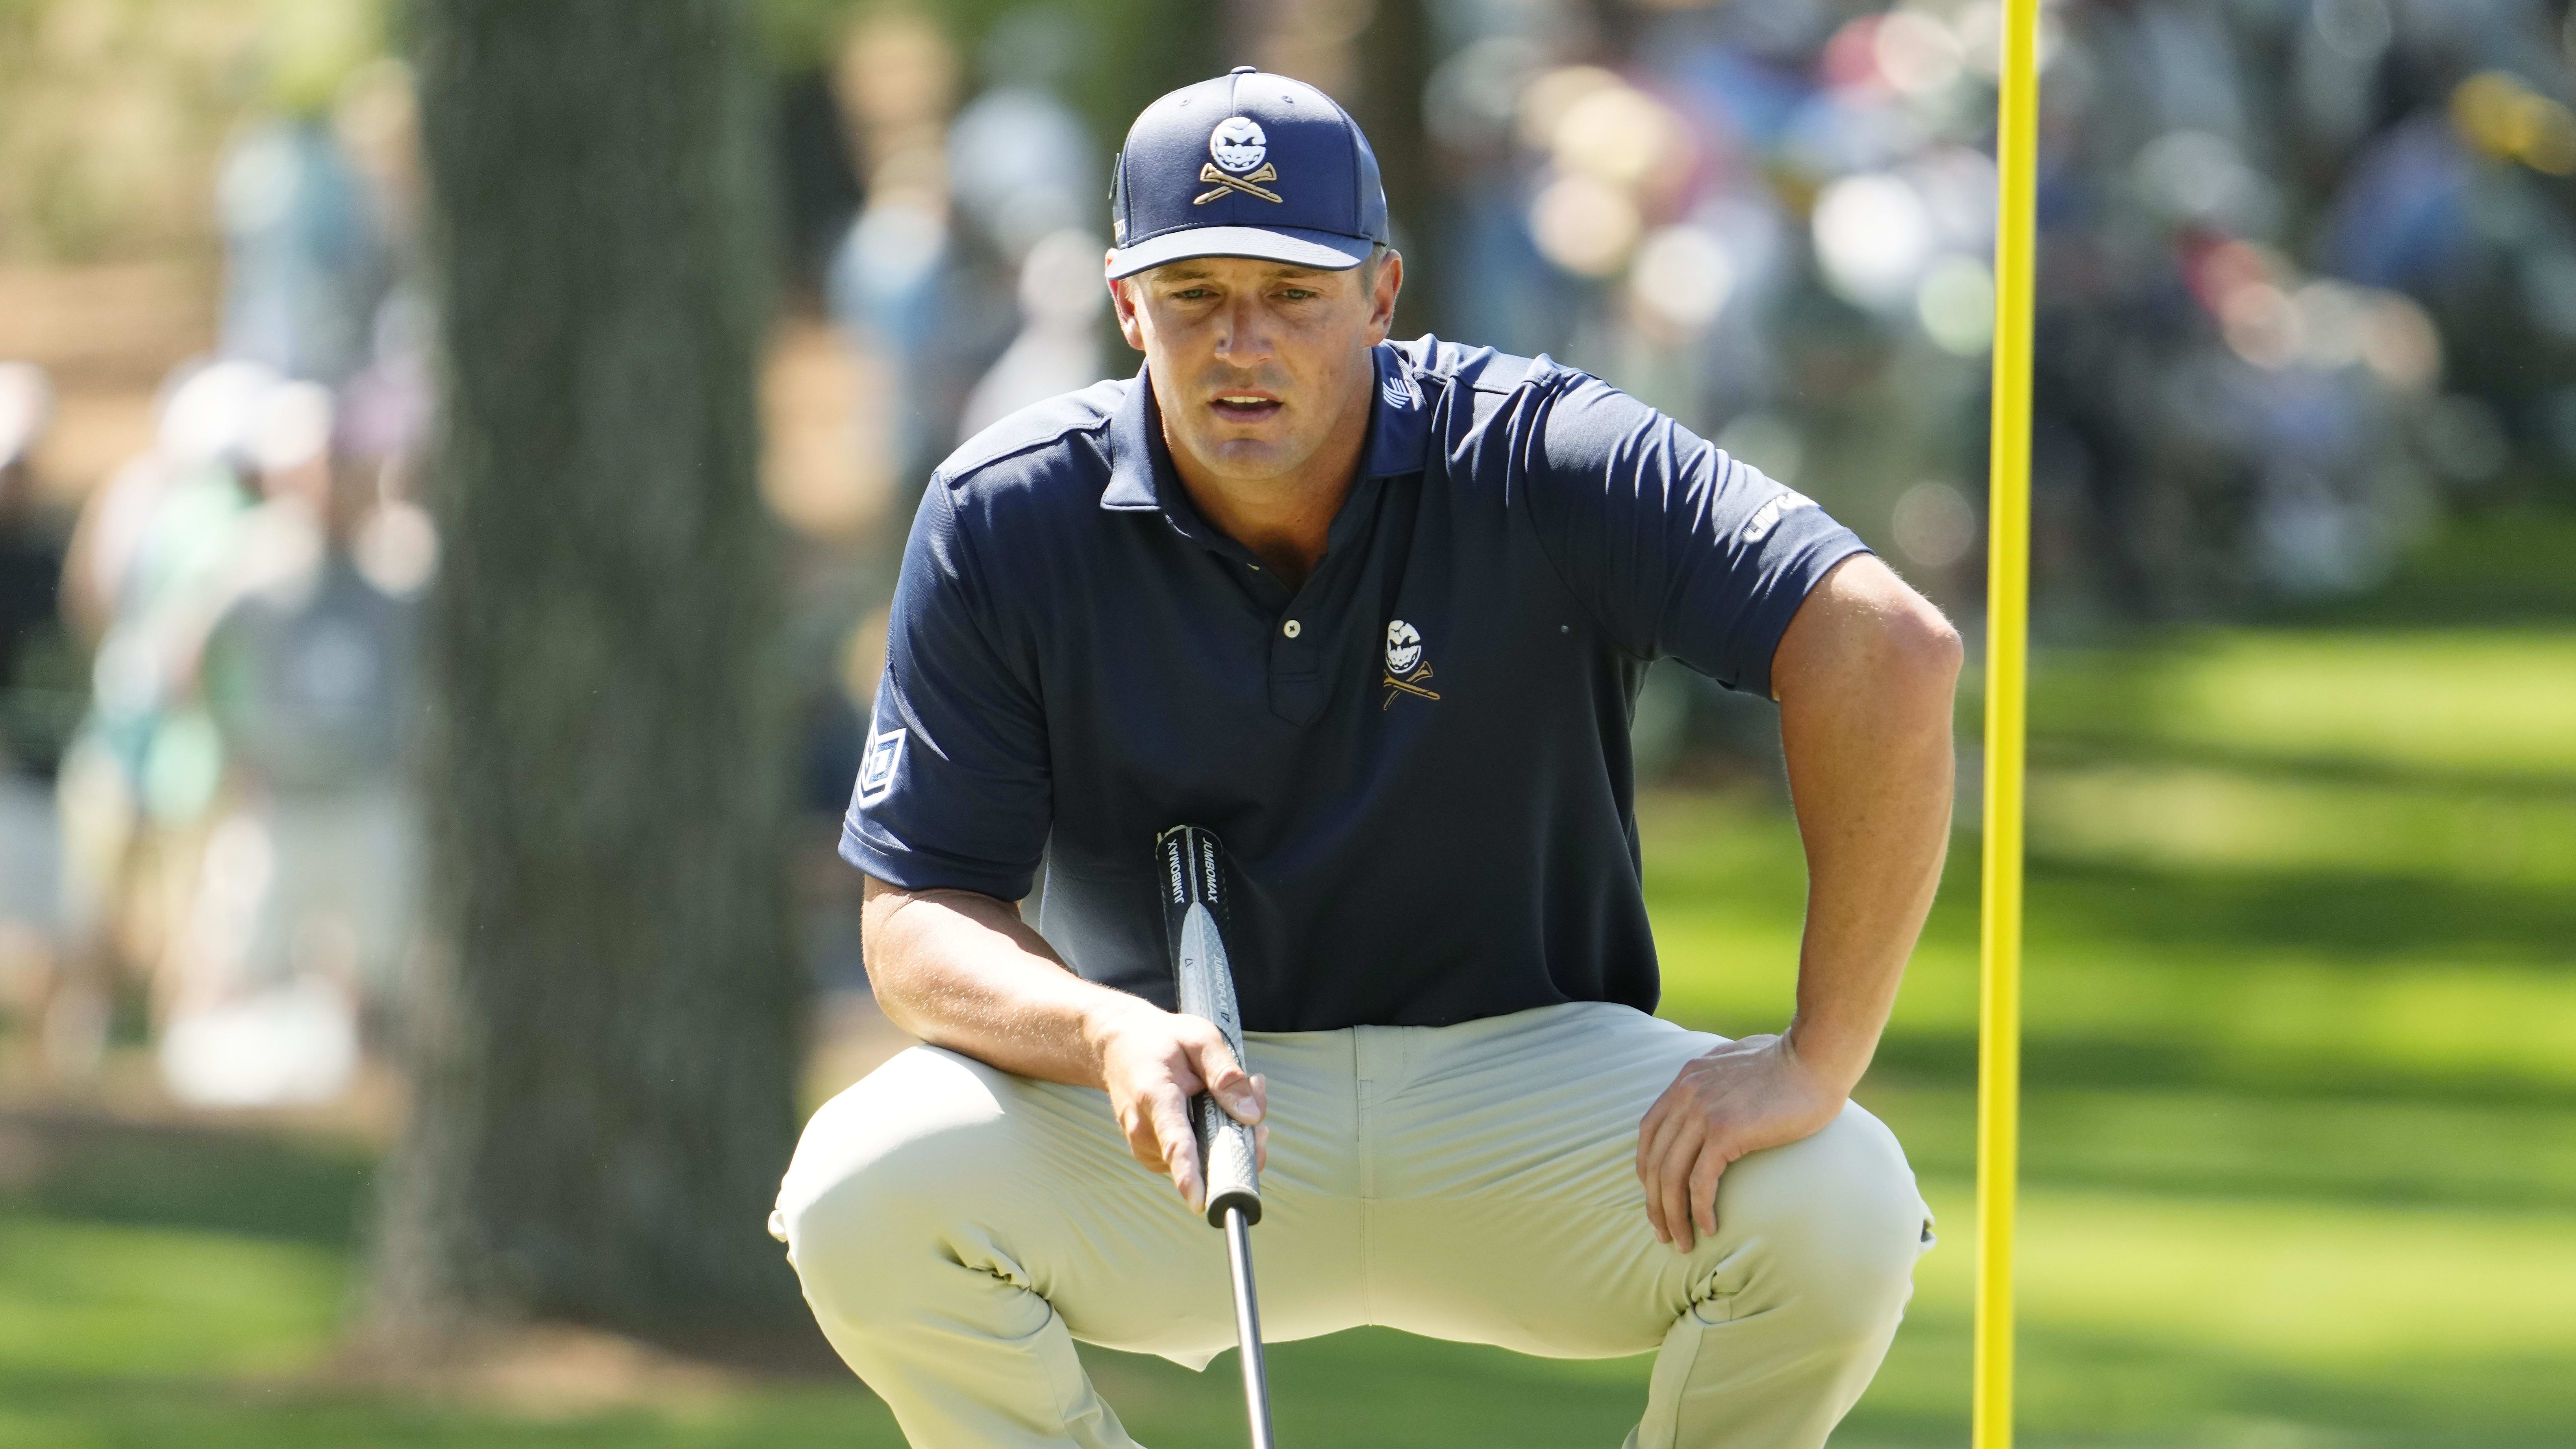 Former Mustang Bryson DeChambeau Finishes Masters in Sixth Place